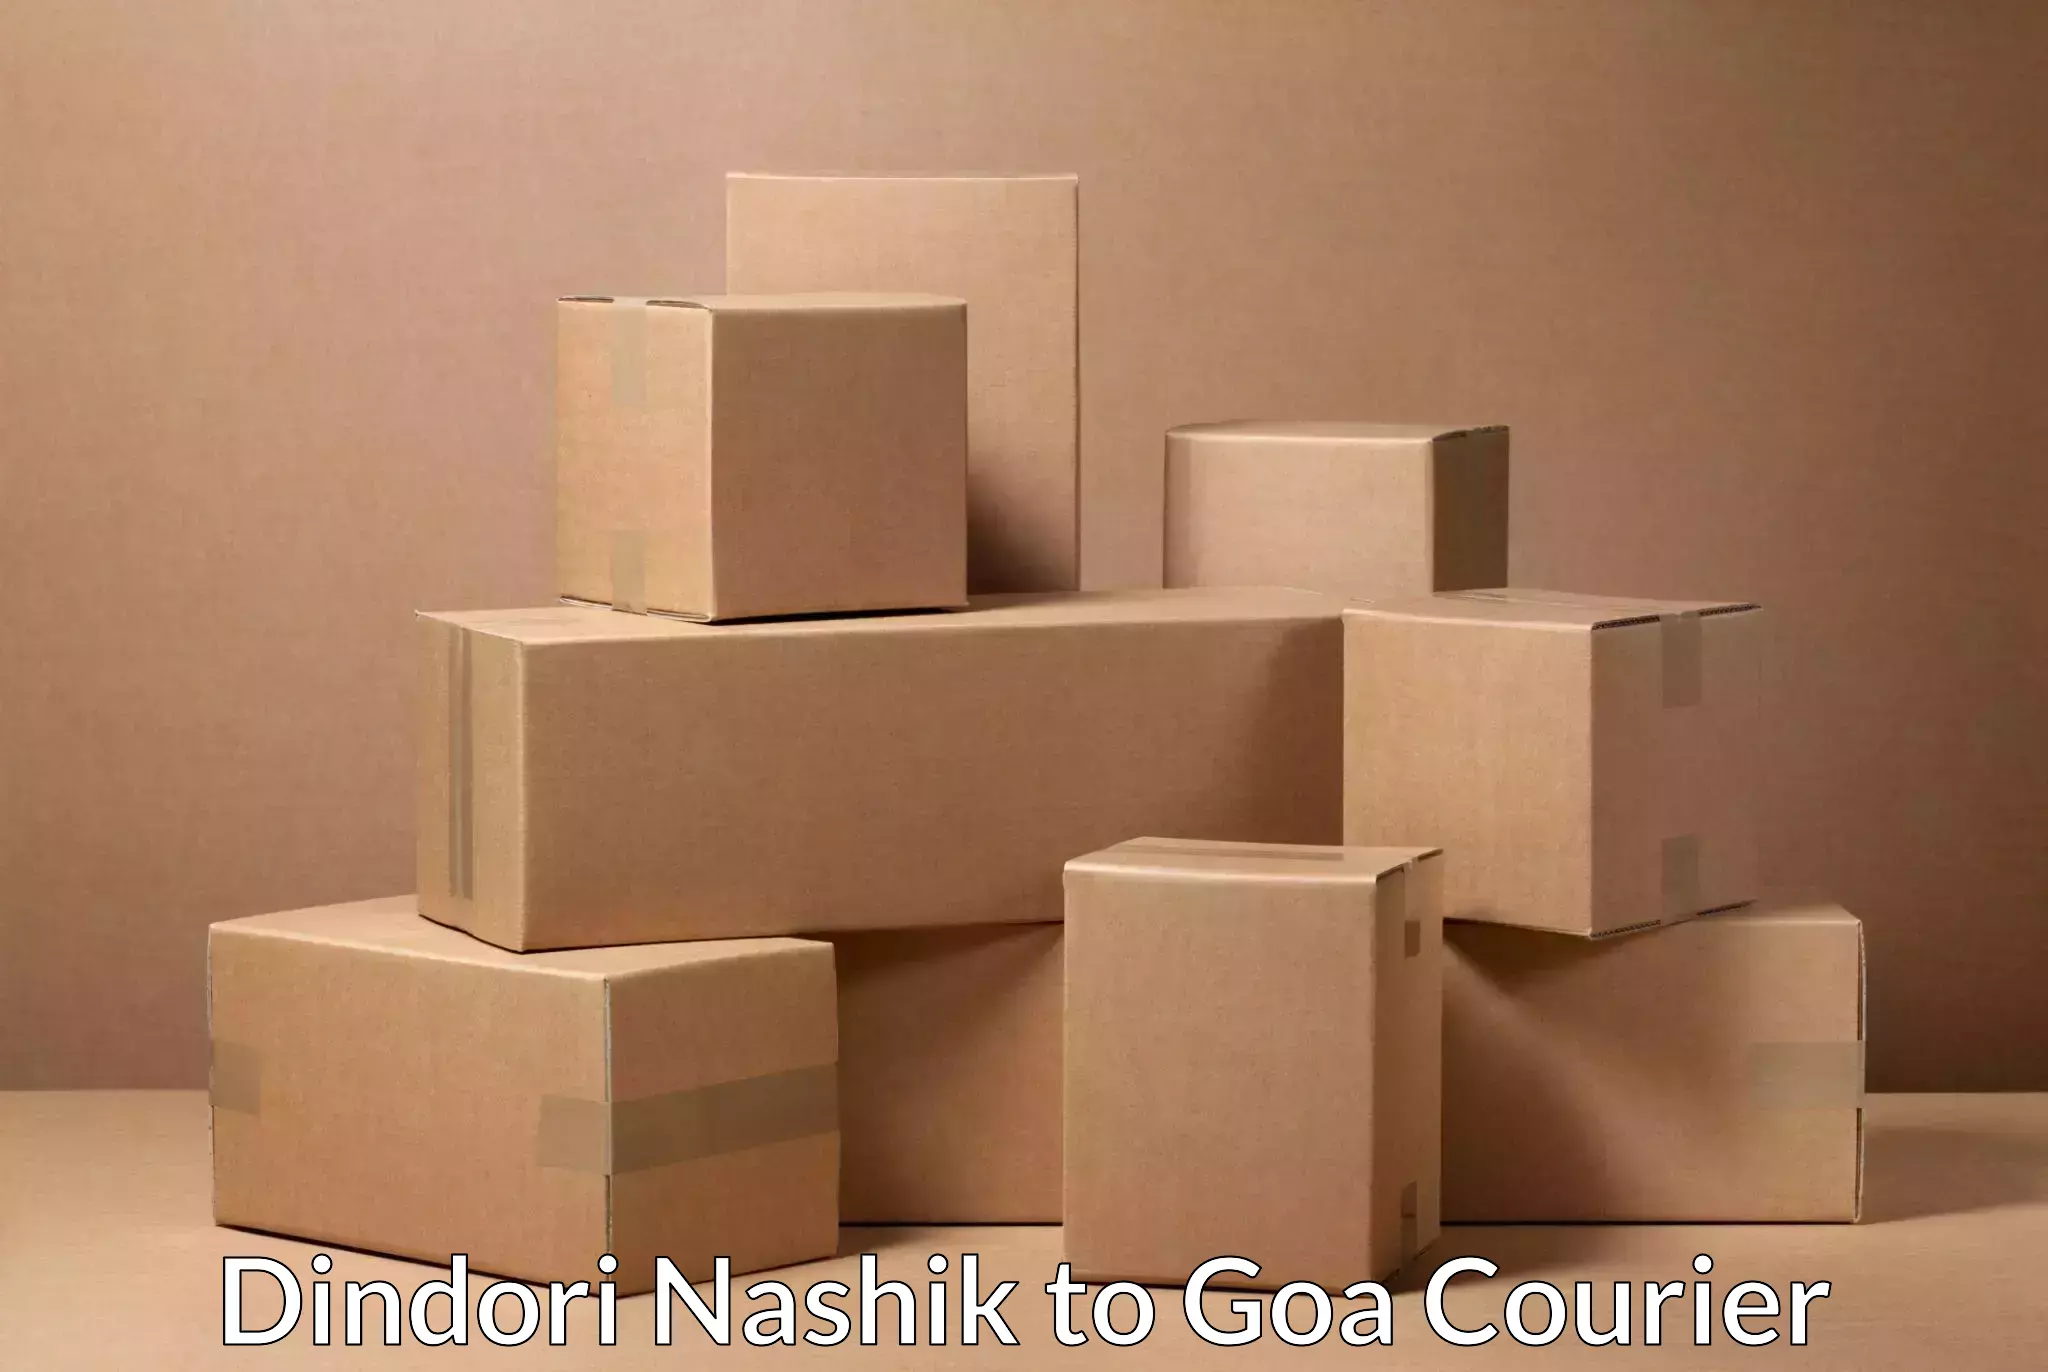 Cost-effective freight solutions Dindori Nashik to South Goa